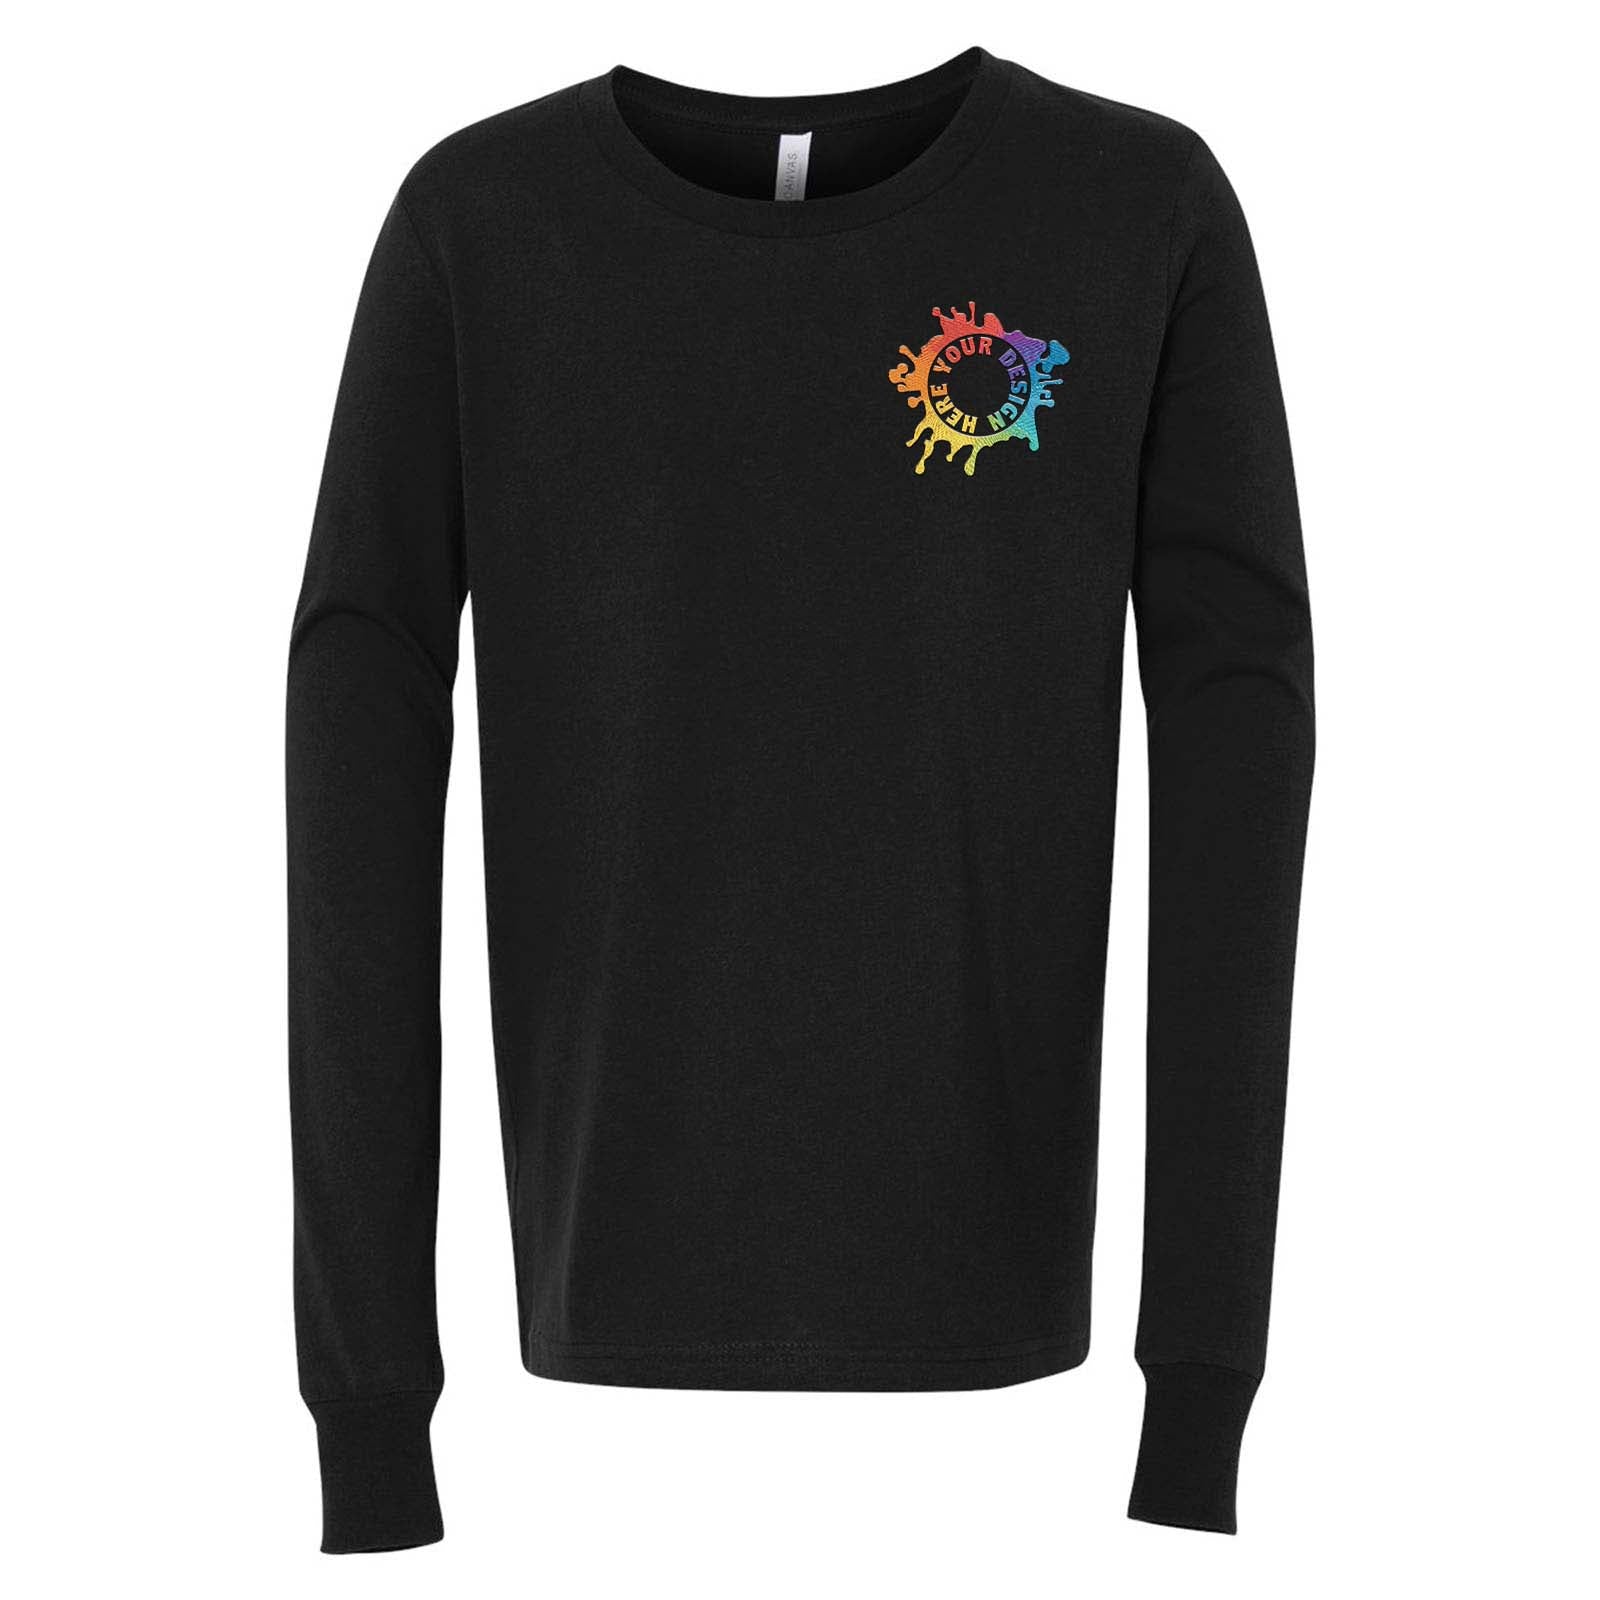 Bella + Canvas Youth Unisex 100% Cotton Long Sleeve T-Shirt Embroidery - Mato & Hash